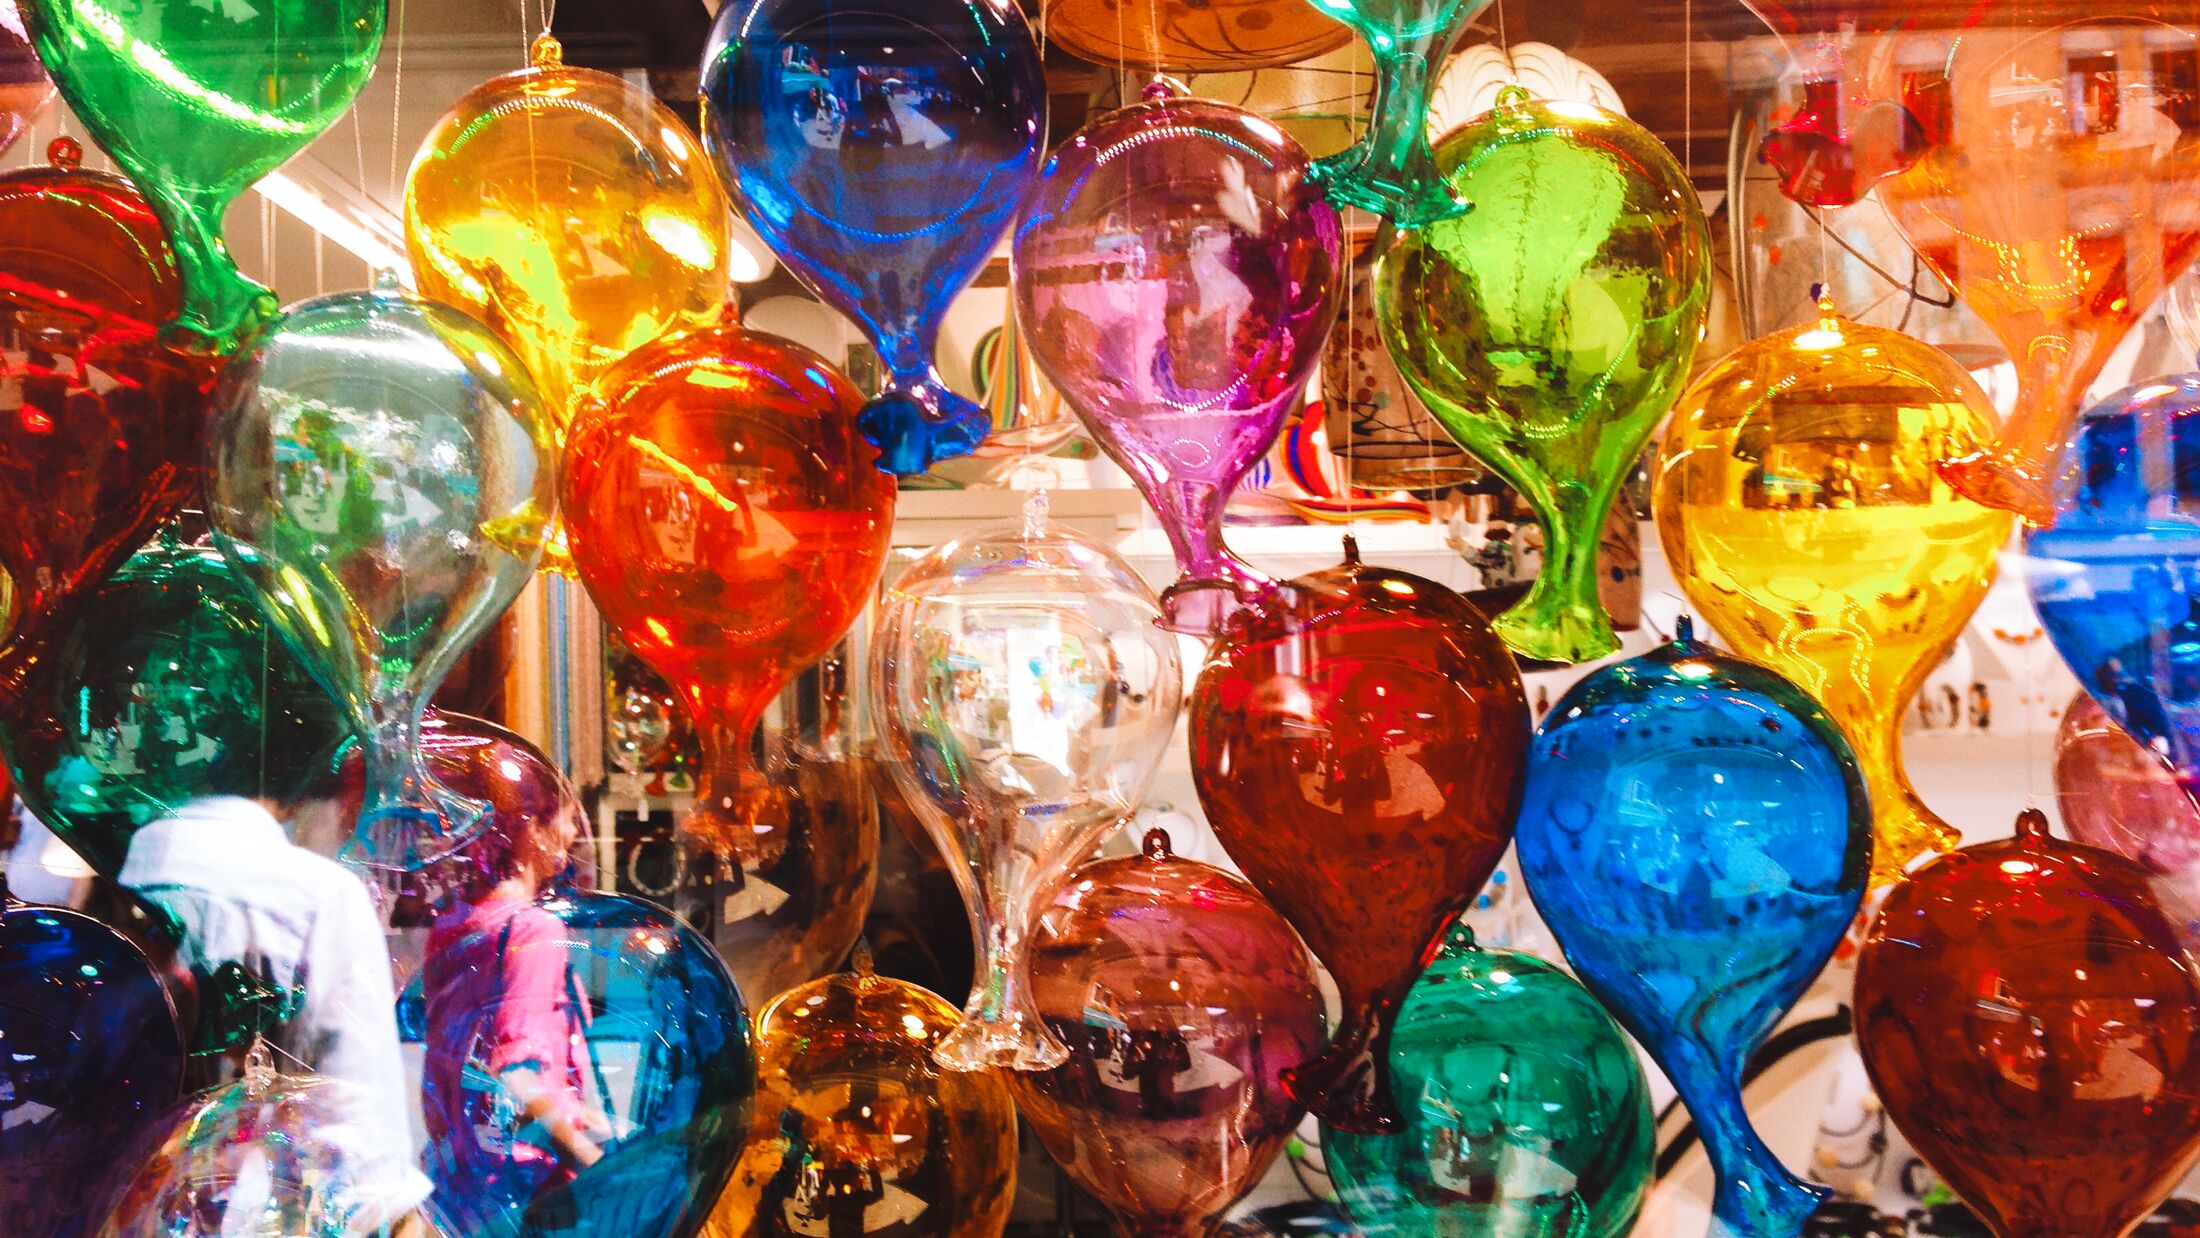 Coloured glass balloons in a shop window in Venice, Italy.